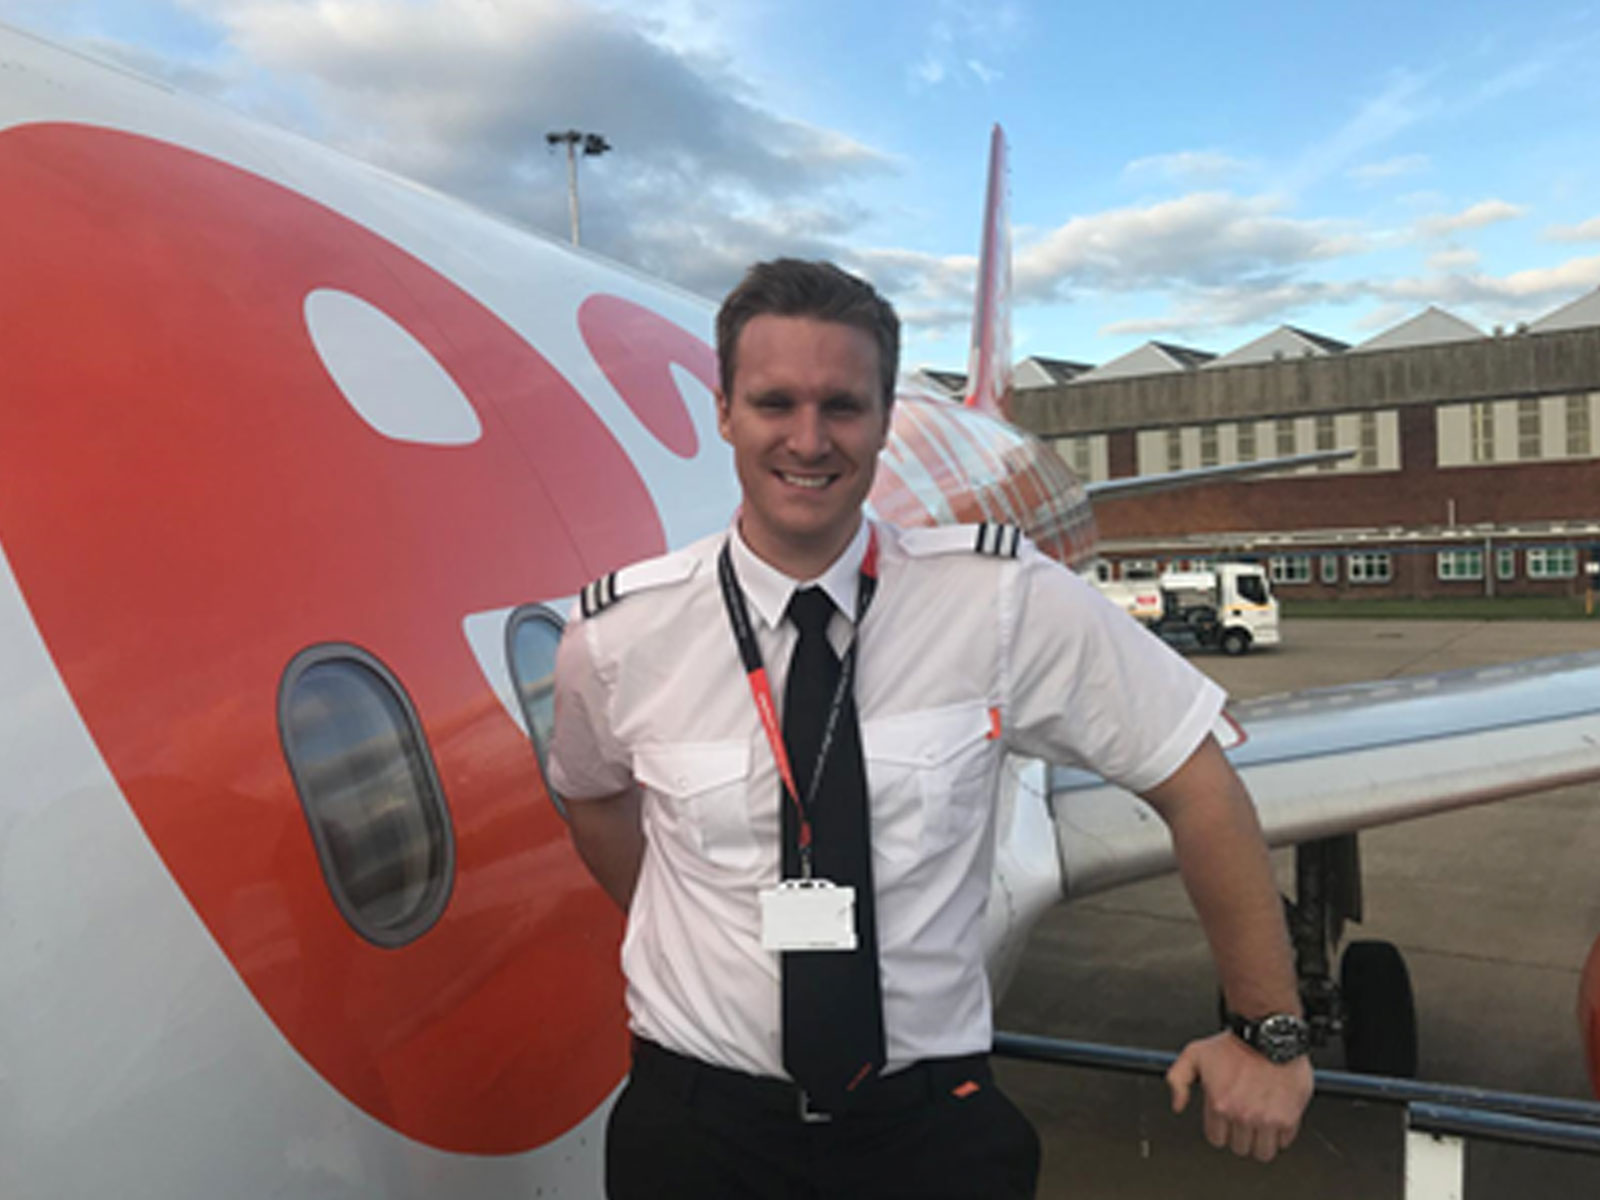 easyjet-pilot-tim-explains-how-he-completed-his-training-while-working-in-air-traffic